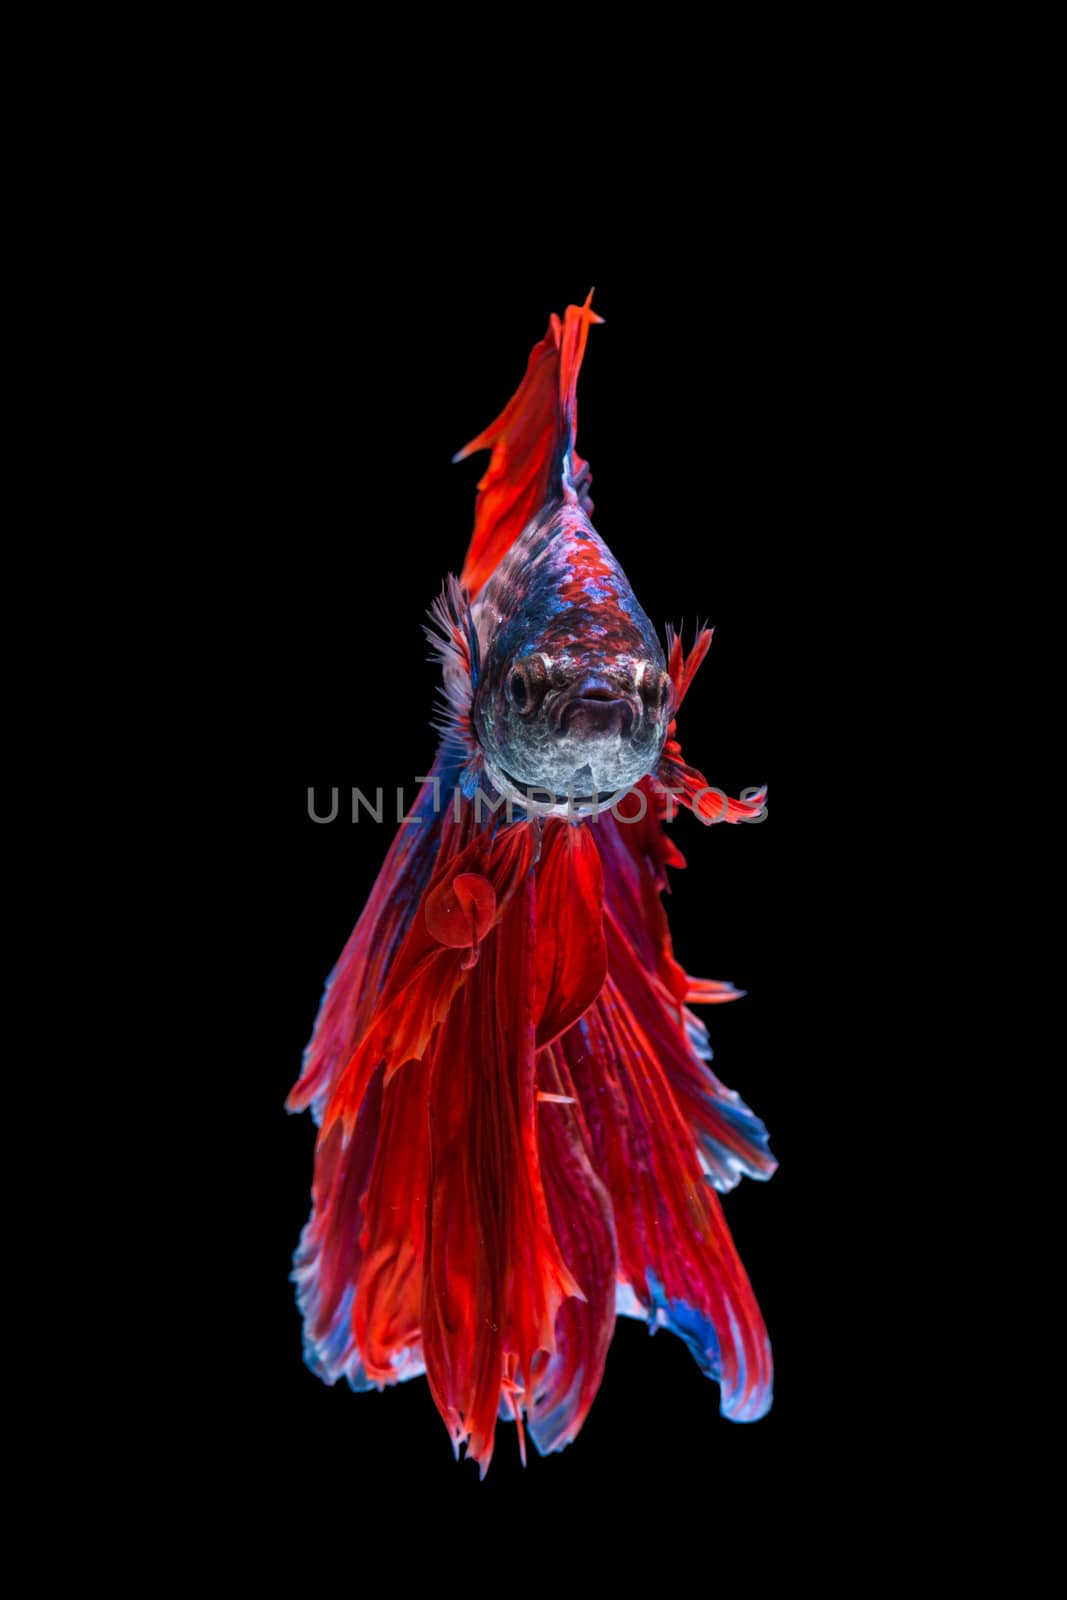 Red and blue betta fish, siamese fighting fish on black backgrou by yuiyuize